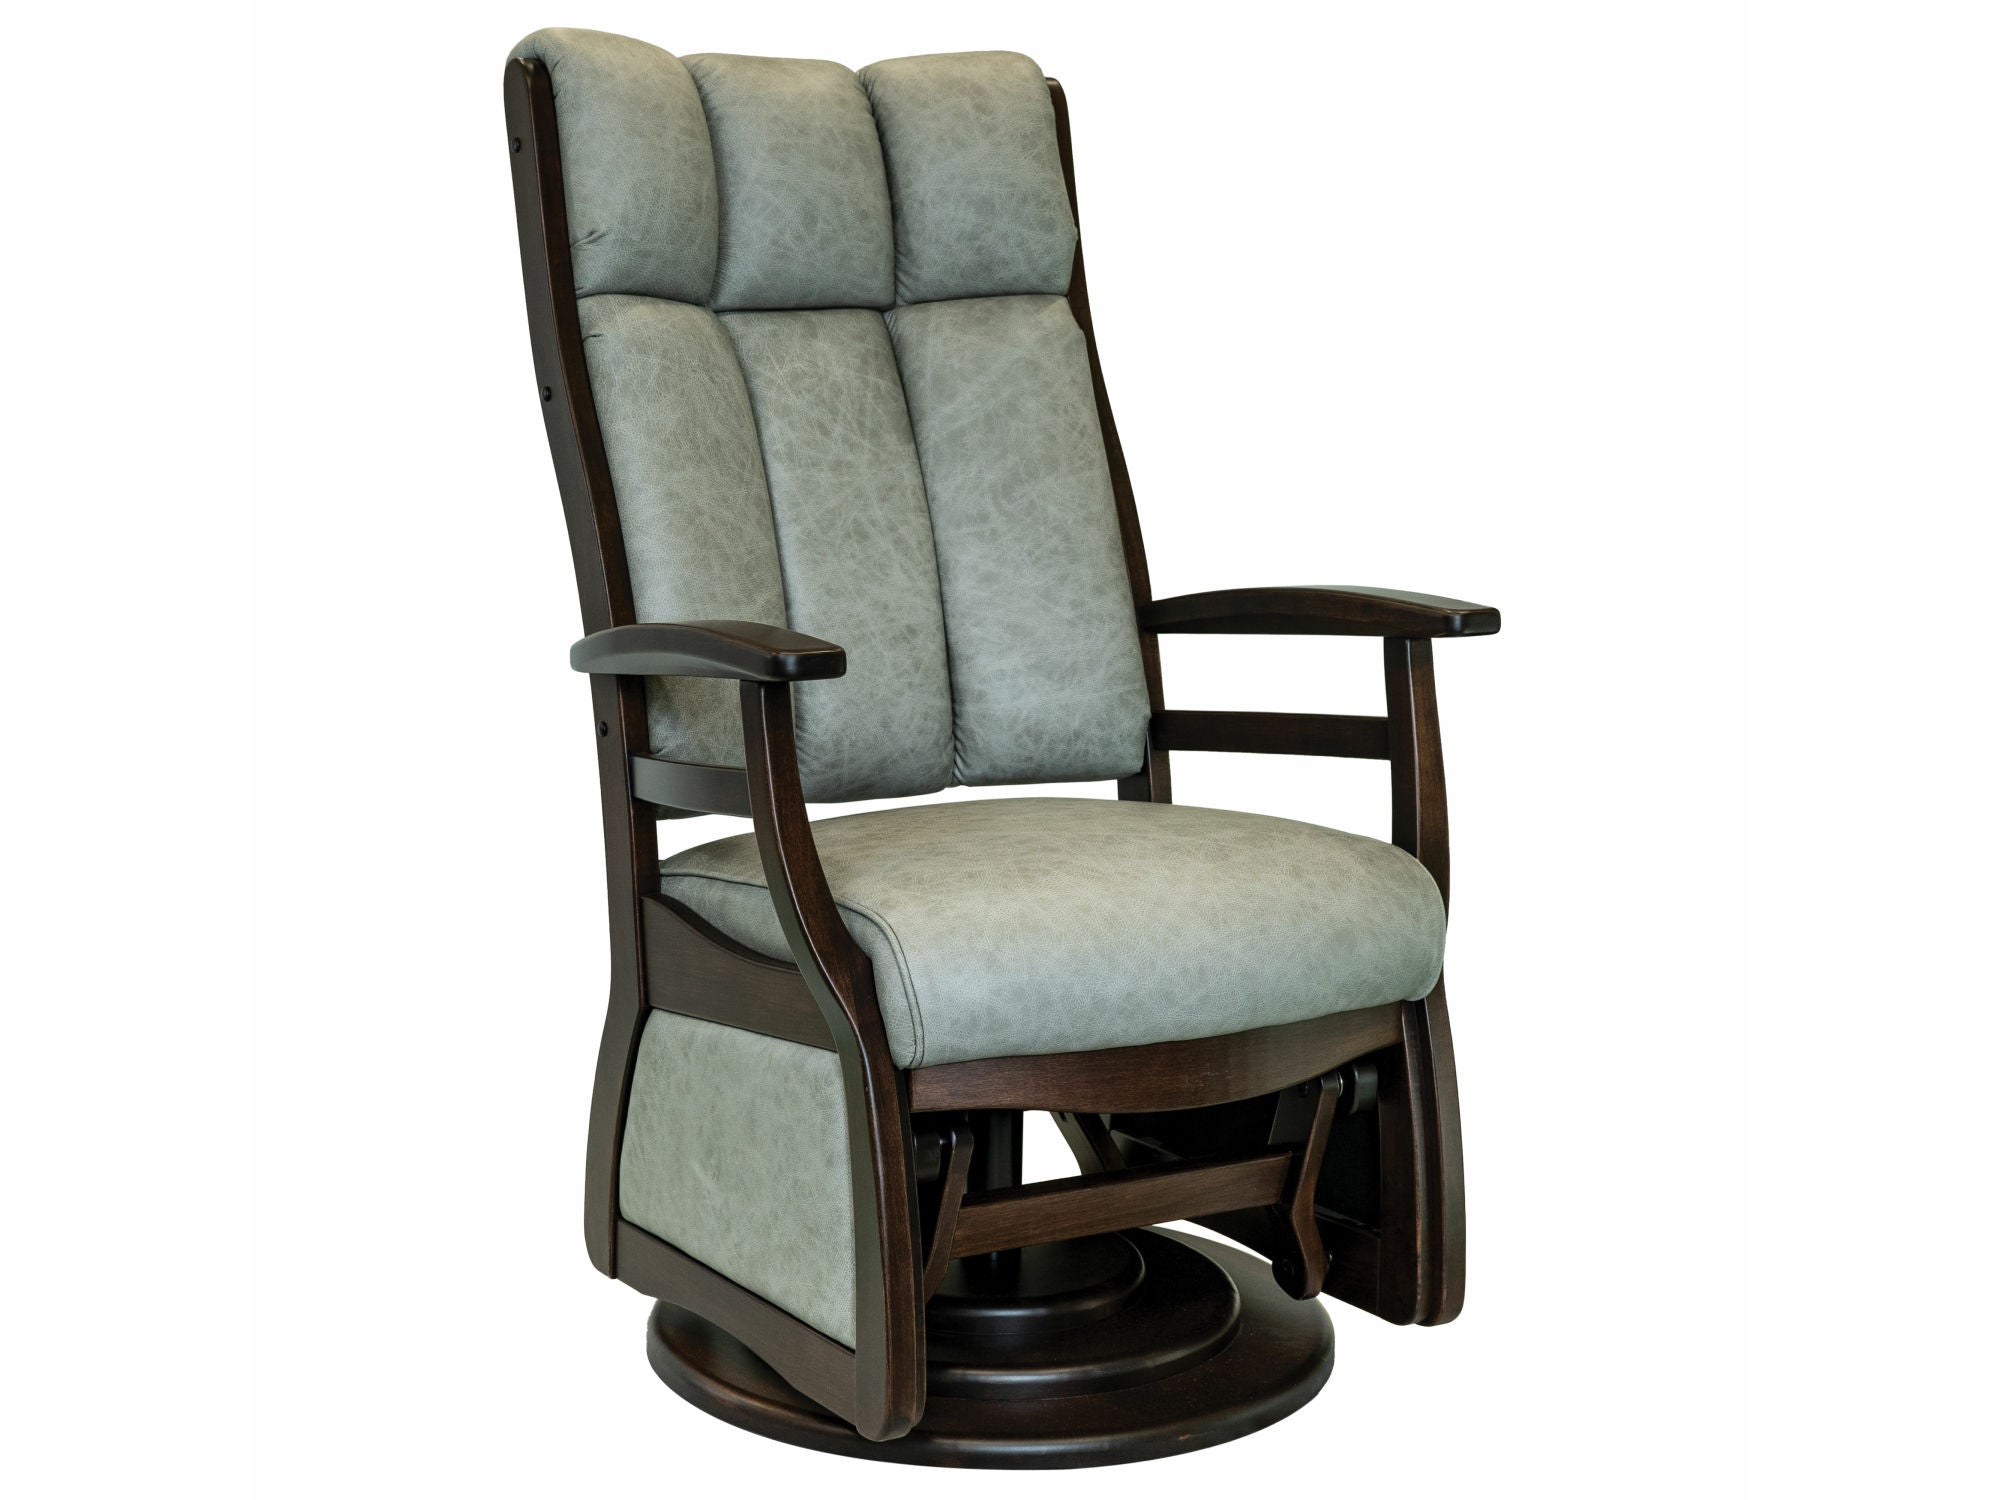 Amish Sierra 45" High Back Swivel Glider with Wood Arms